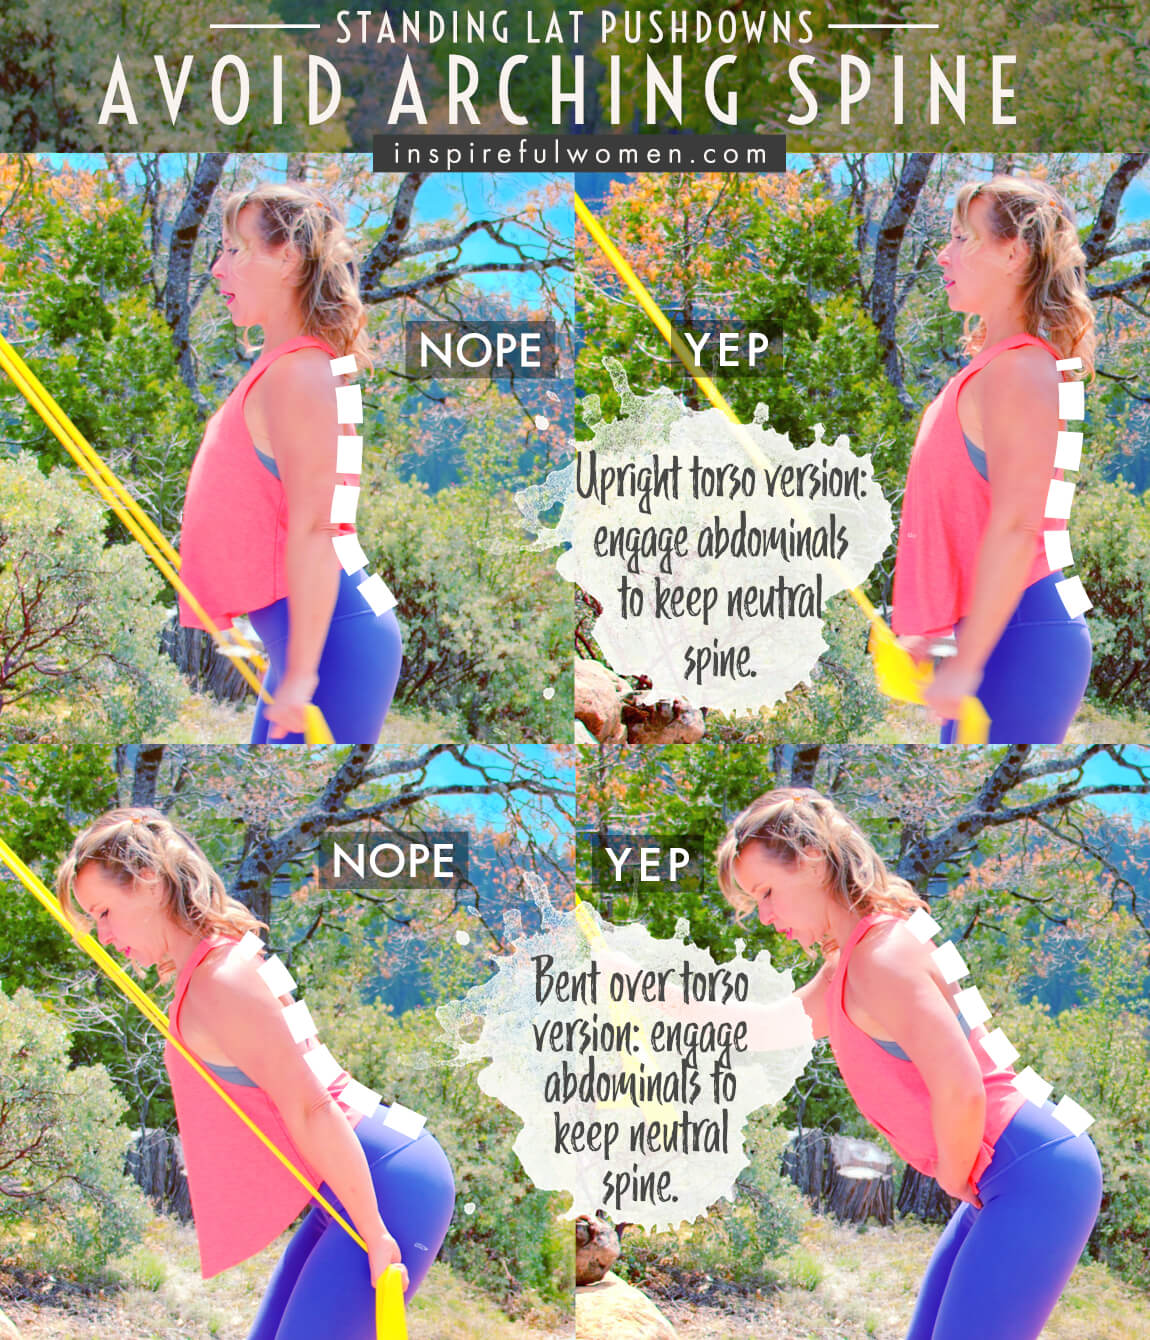 avoid-arching-spine-standing-straight-arm-lats-push-downs-back-exercise-common-mistakes